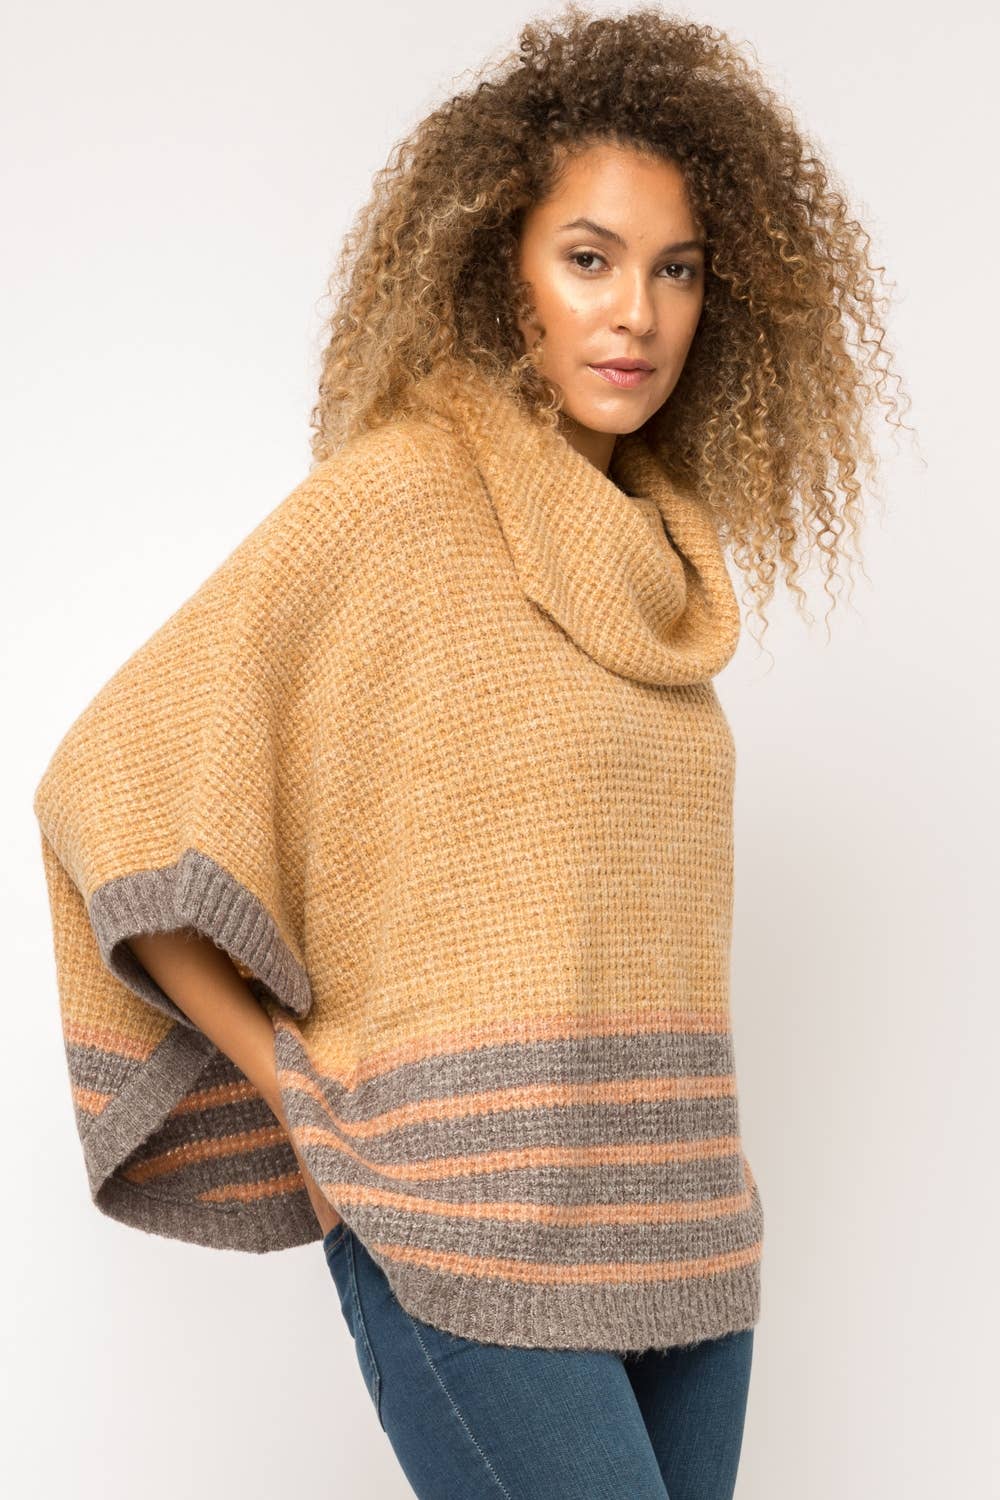 Turtle Neck Poncho in Mustard with Grey/Rust Stripes